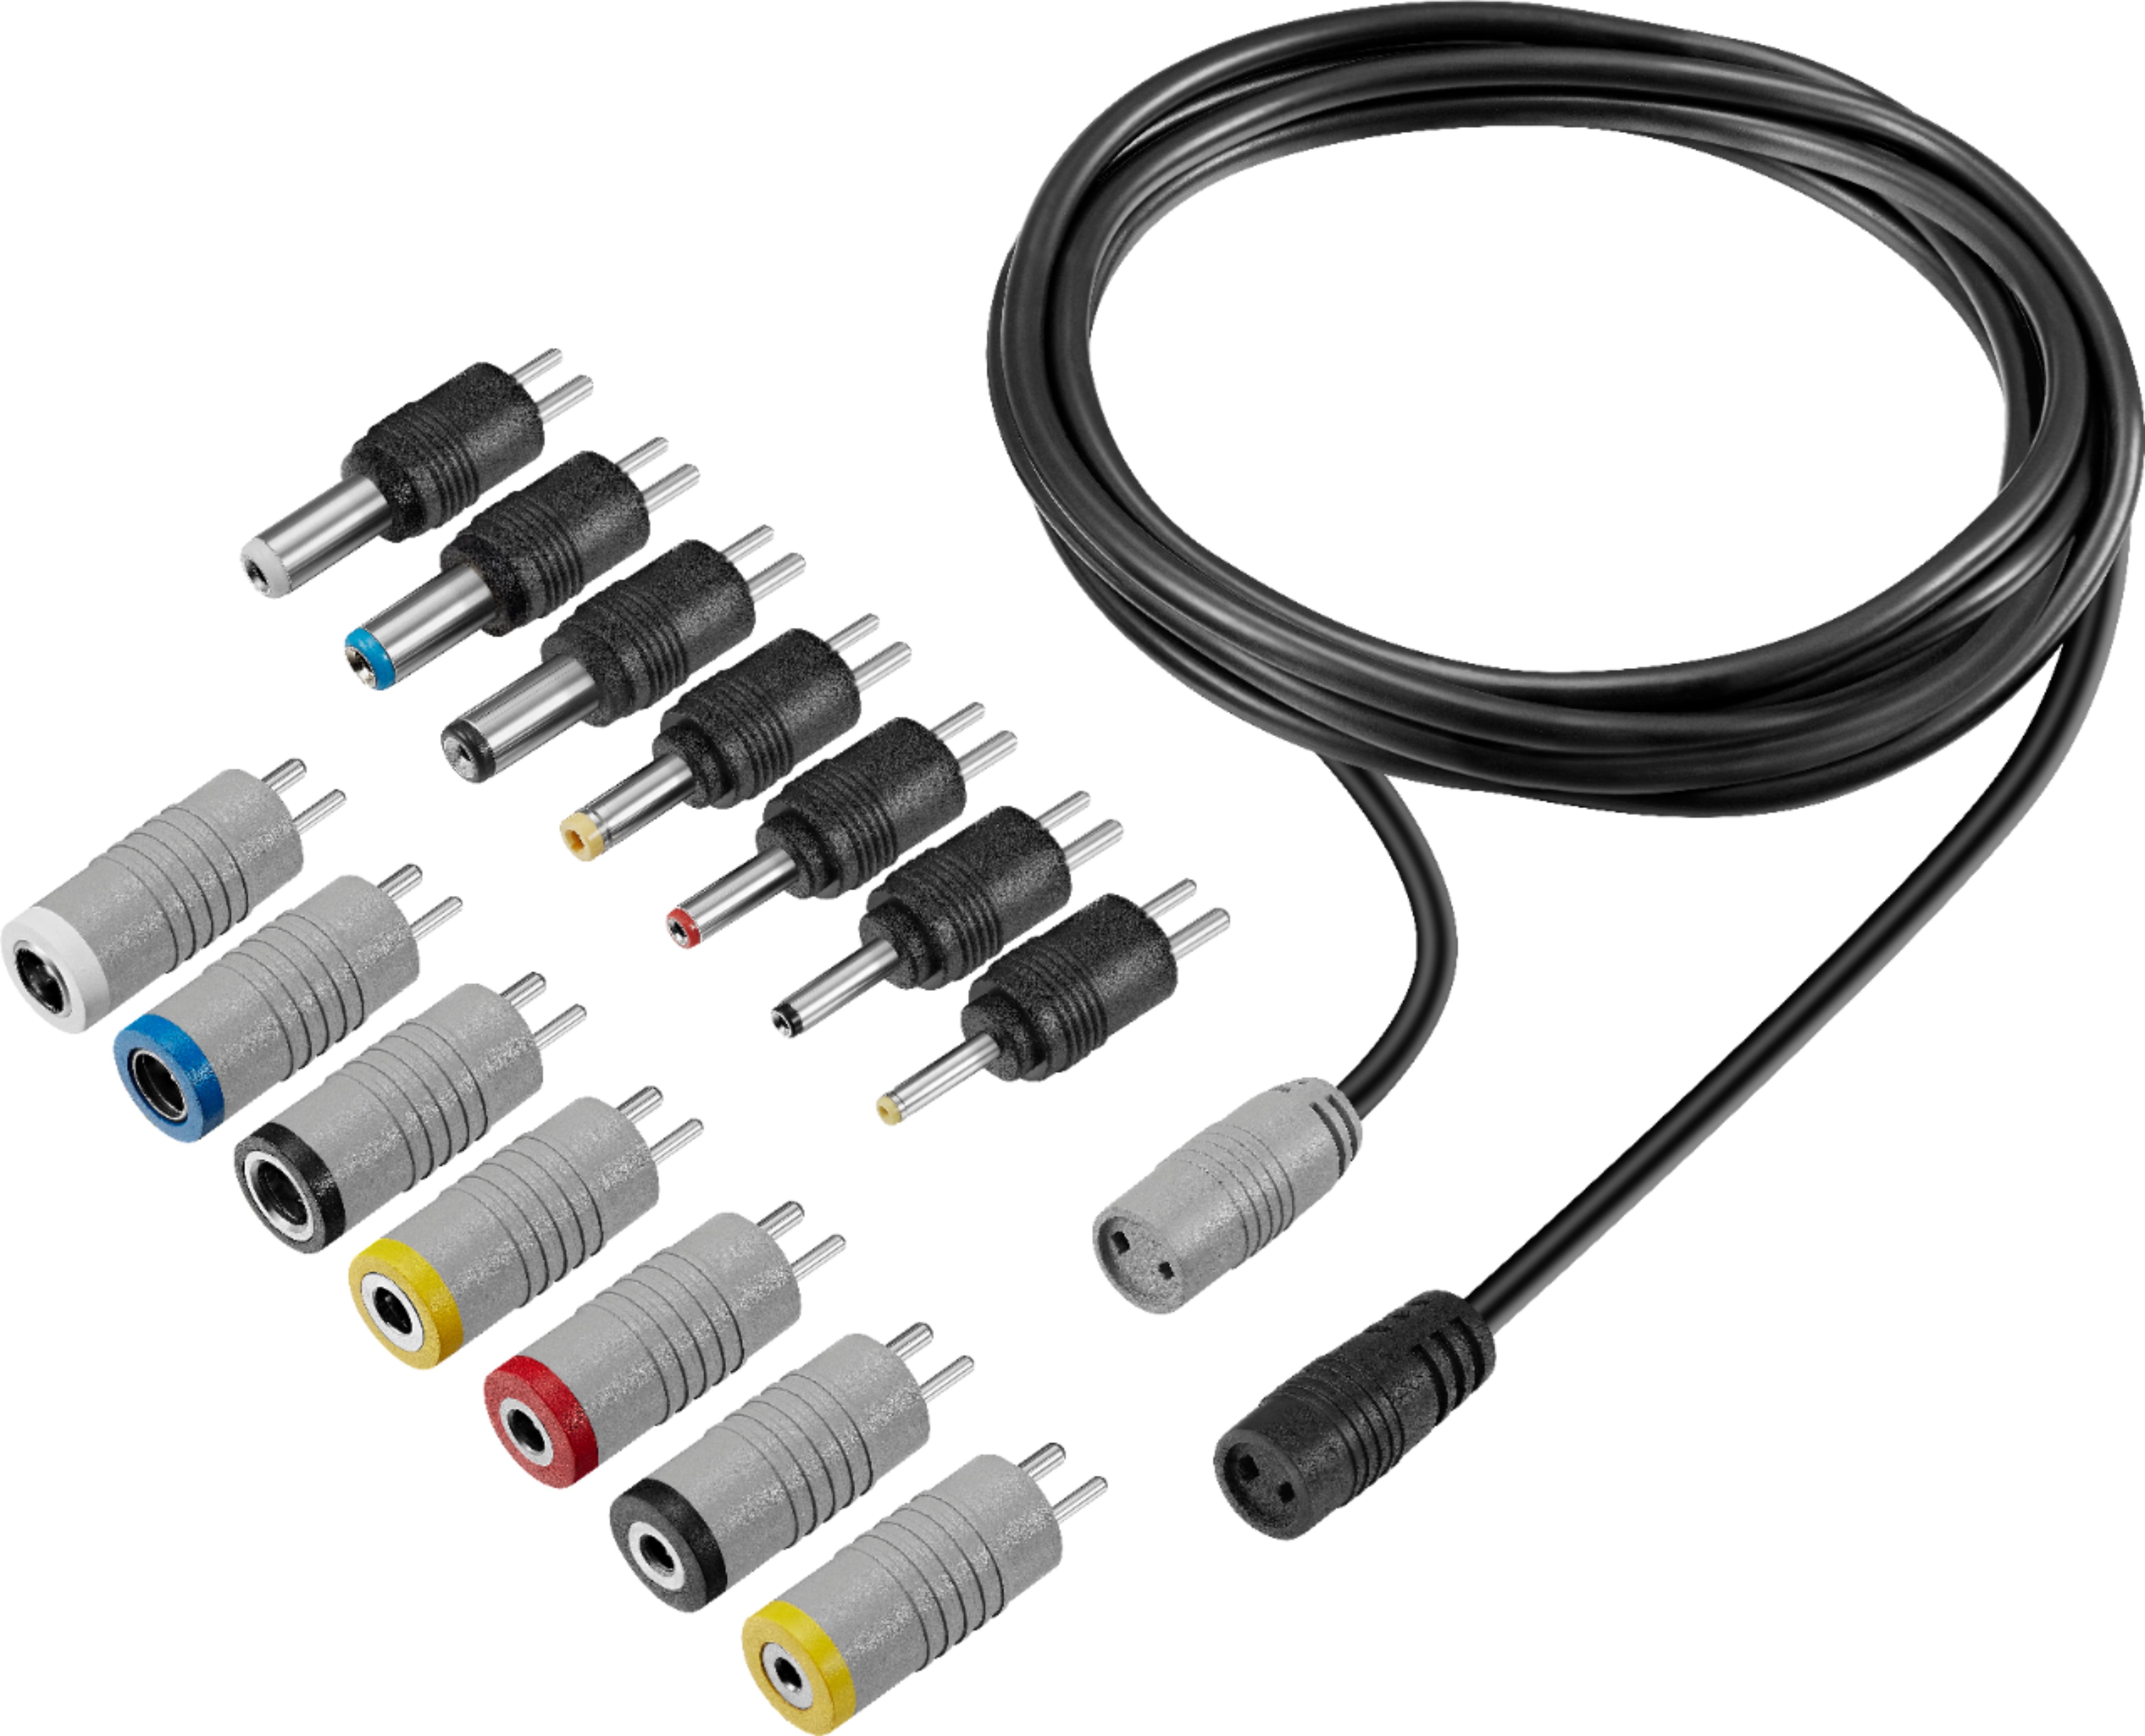 evitar Ya Neuropatía Best Buy essentials™ 6' DC Extension Cable Kit Black BE-HCL329 - Best Buy